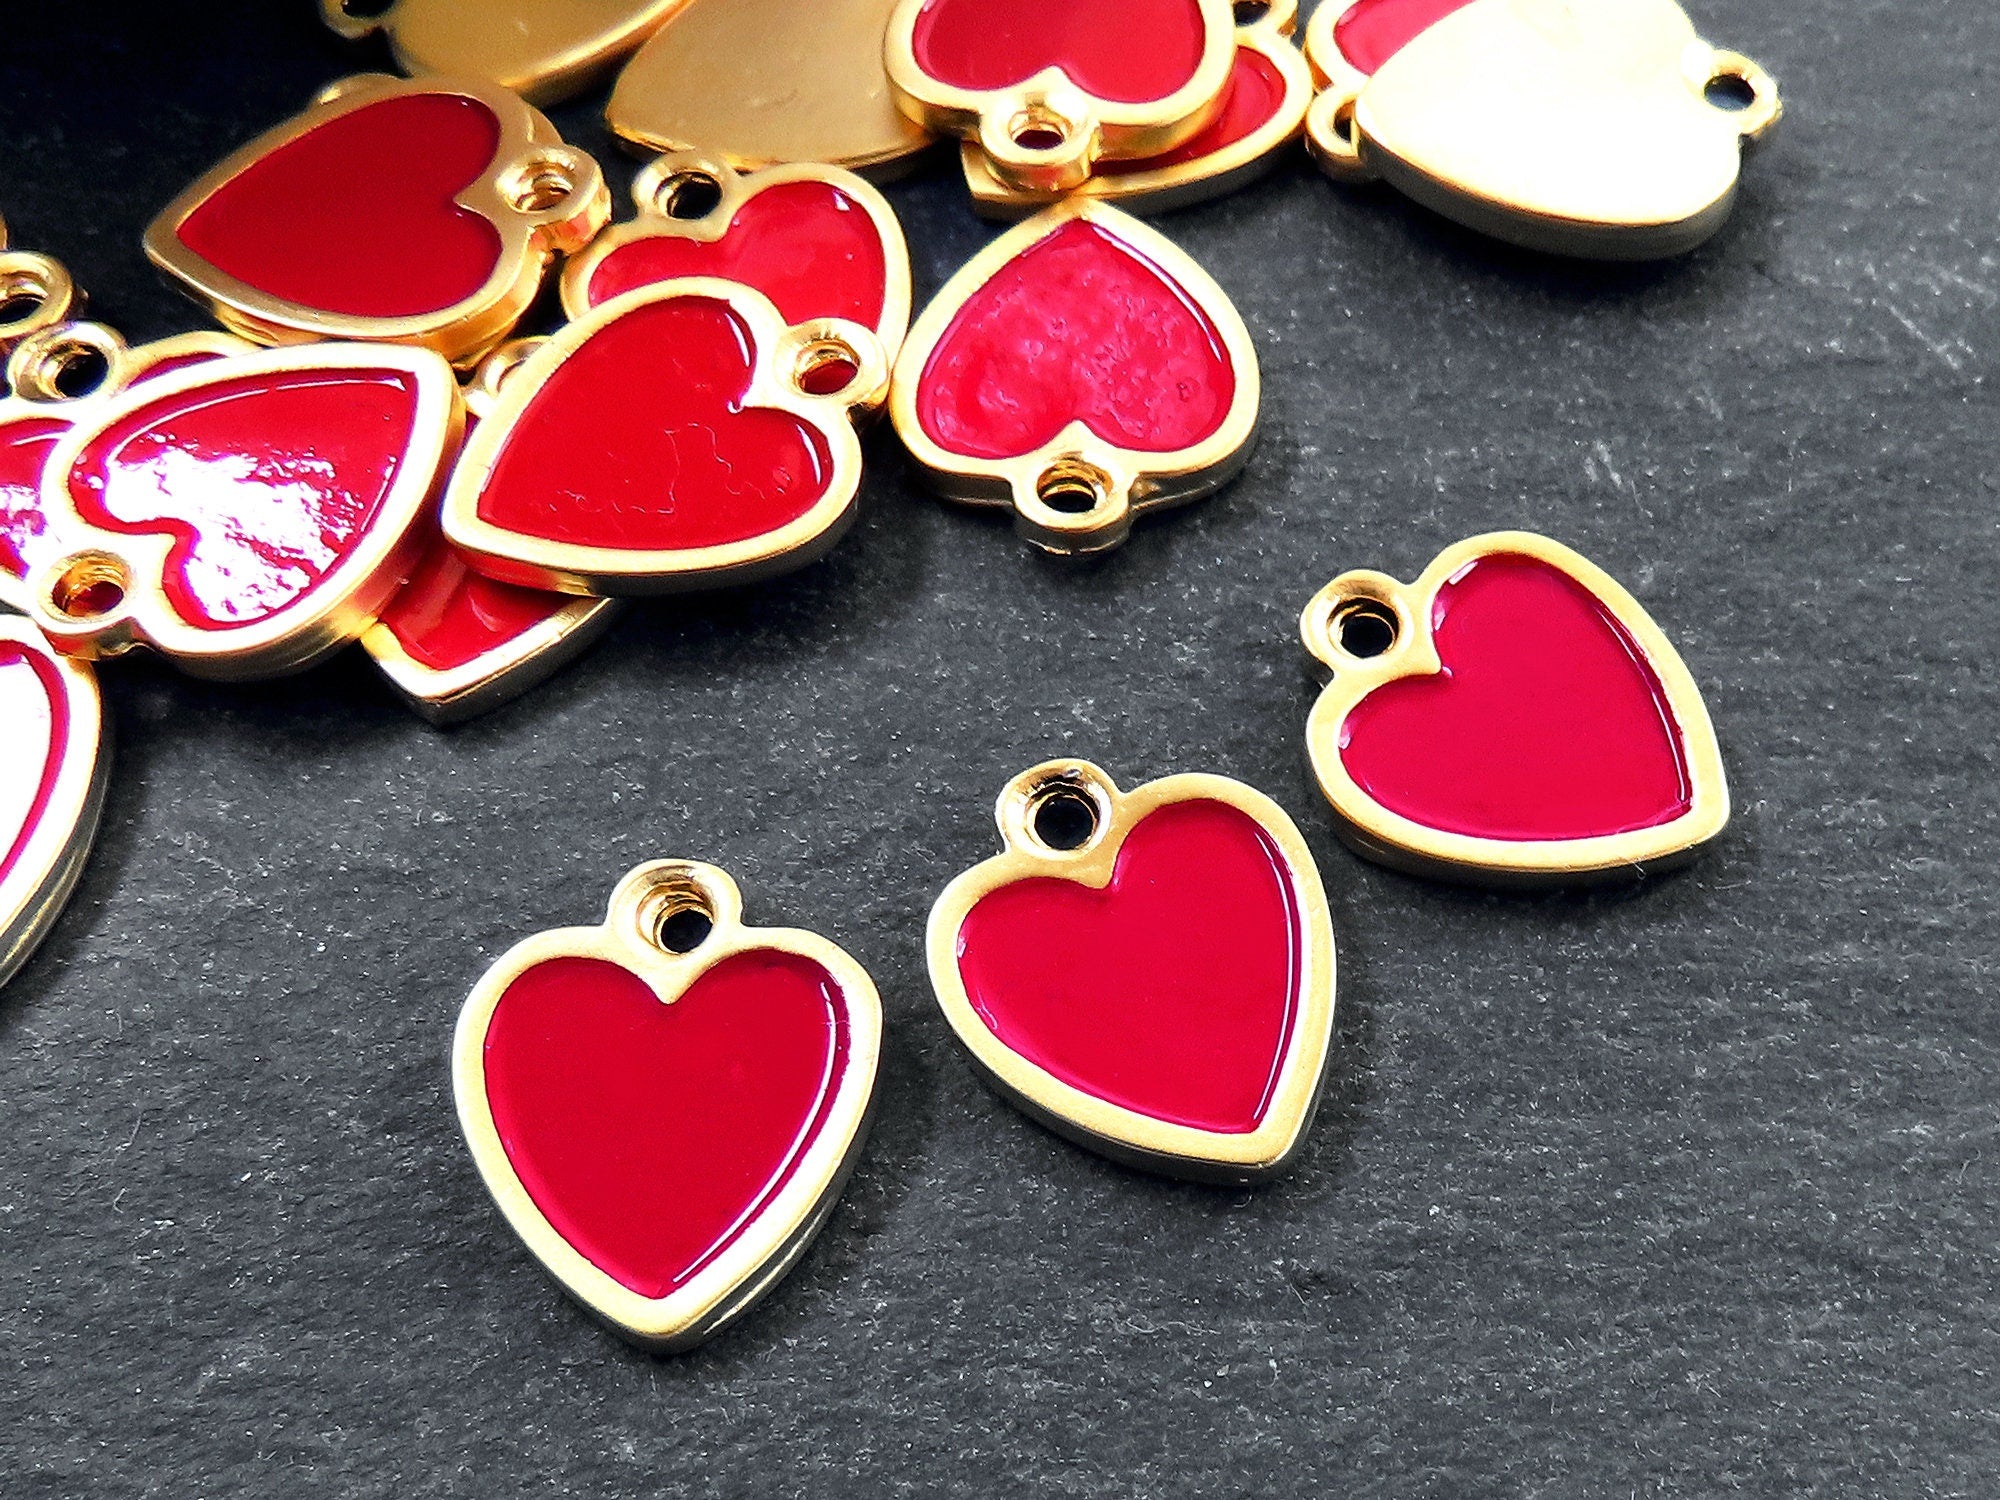 Red Heart Charms, Small Enamel Heart Pendants with Raised Edges, Love Charm, 22k Matte Gold Plated, 3pc